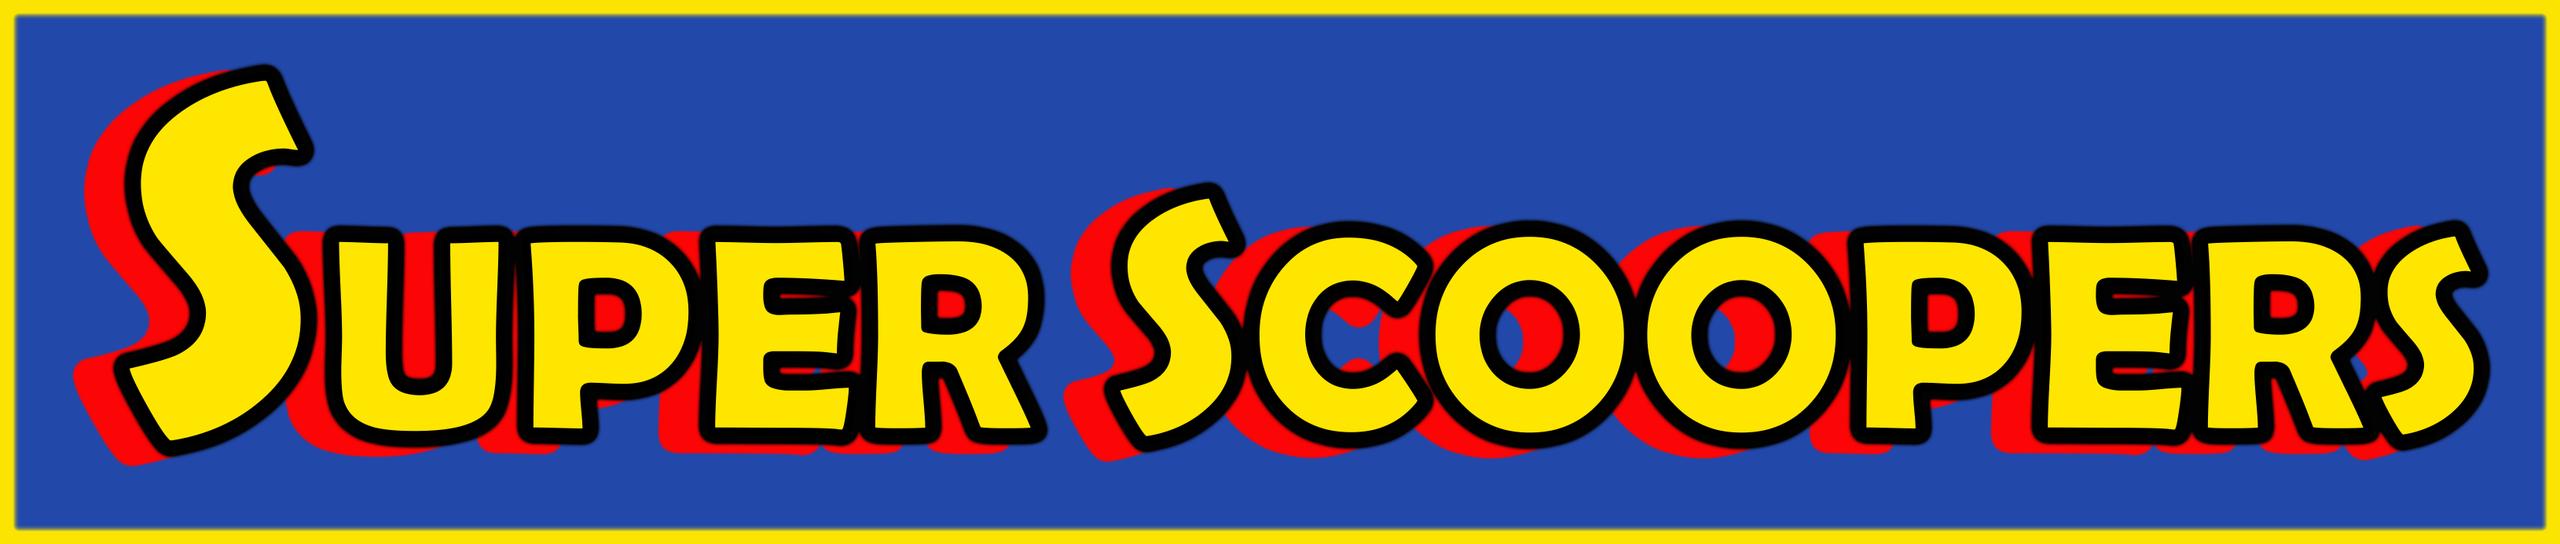 super scoopers neath dog waste removal logo